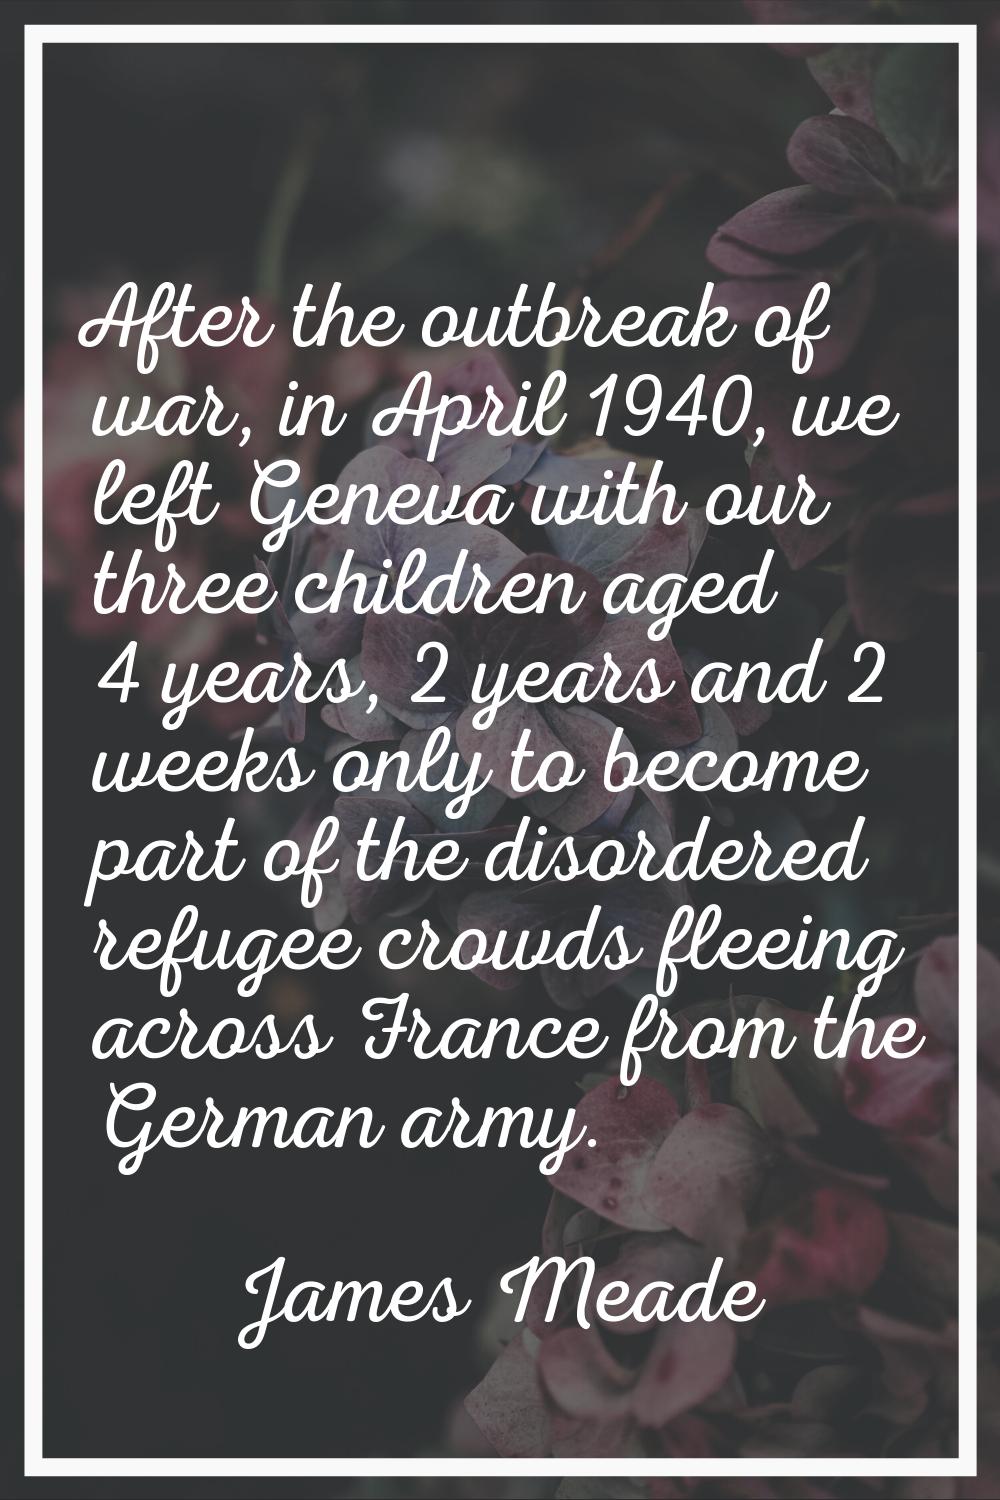 After the outbreak of war, in April 1940, we left Geneva with our three children aged 4 years, 2 ye